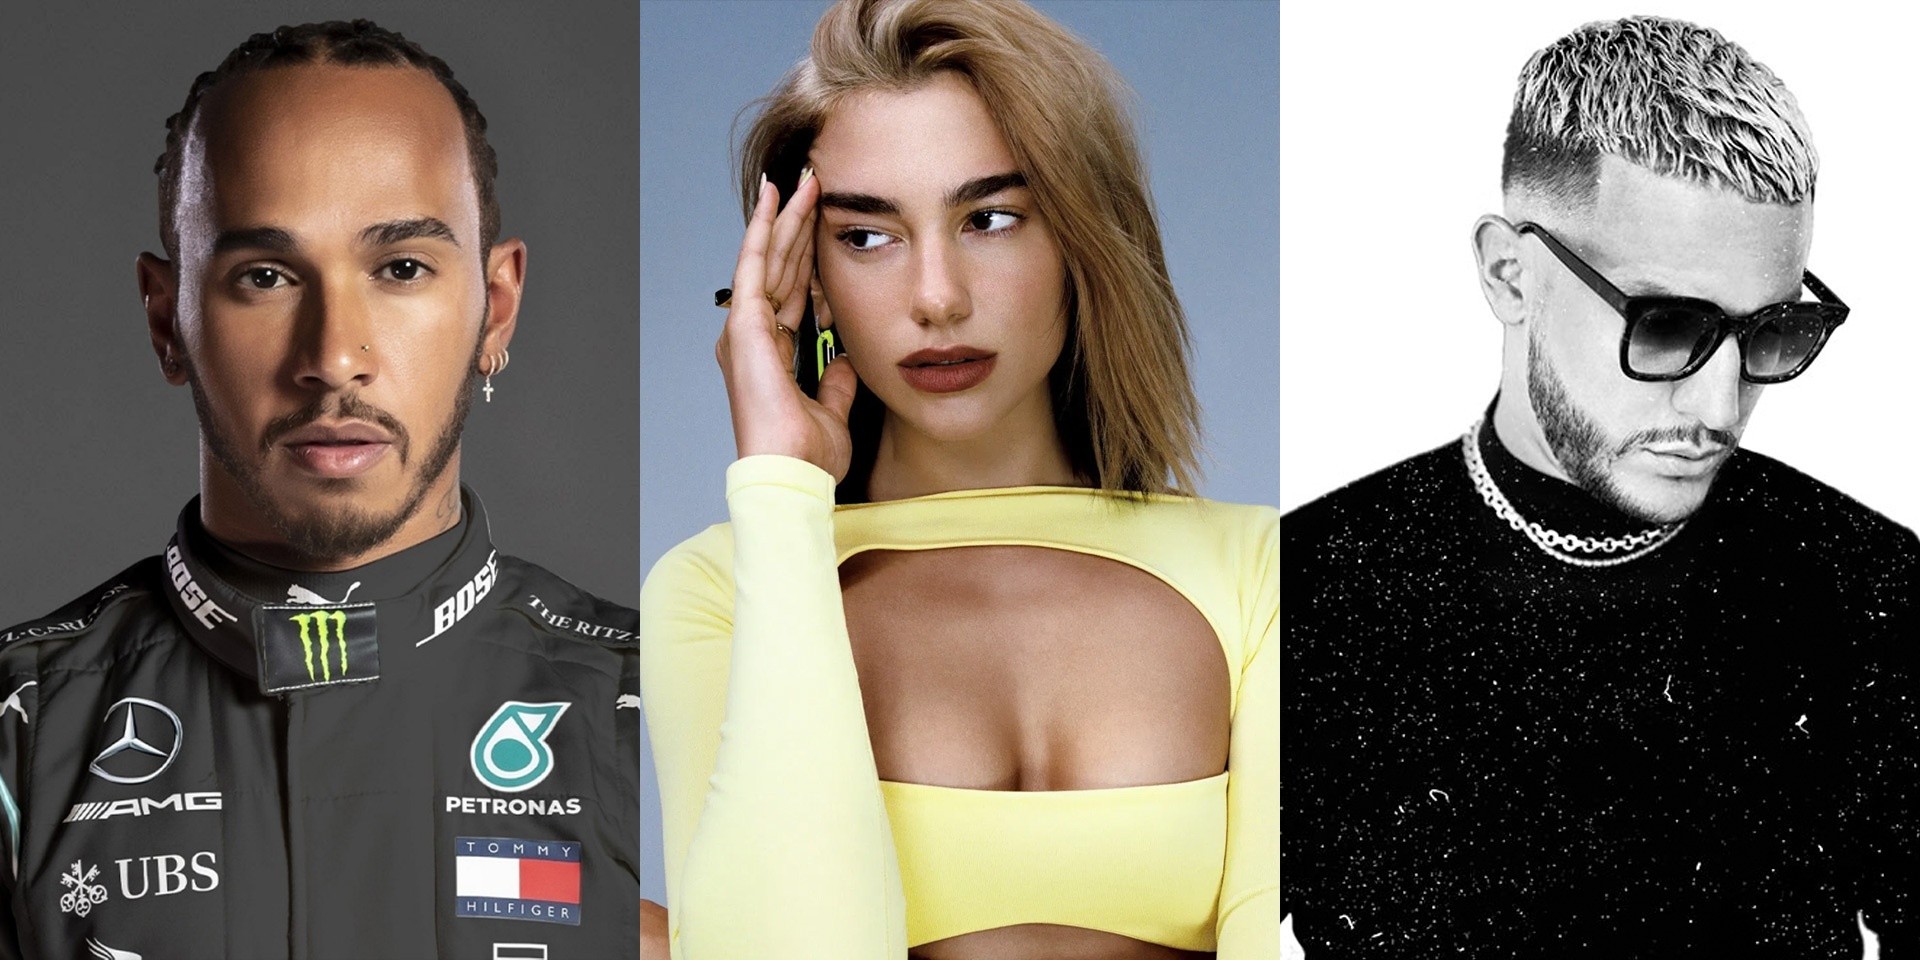 Dua Lipa, Lewis Hamilton, DJ Snake to appear as playable characters with FIFA 21's latest update